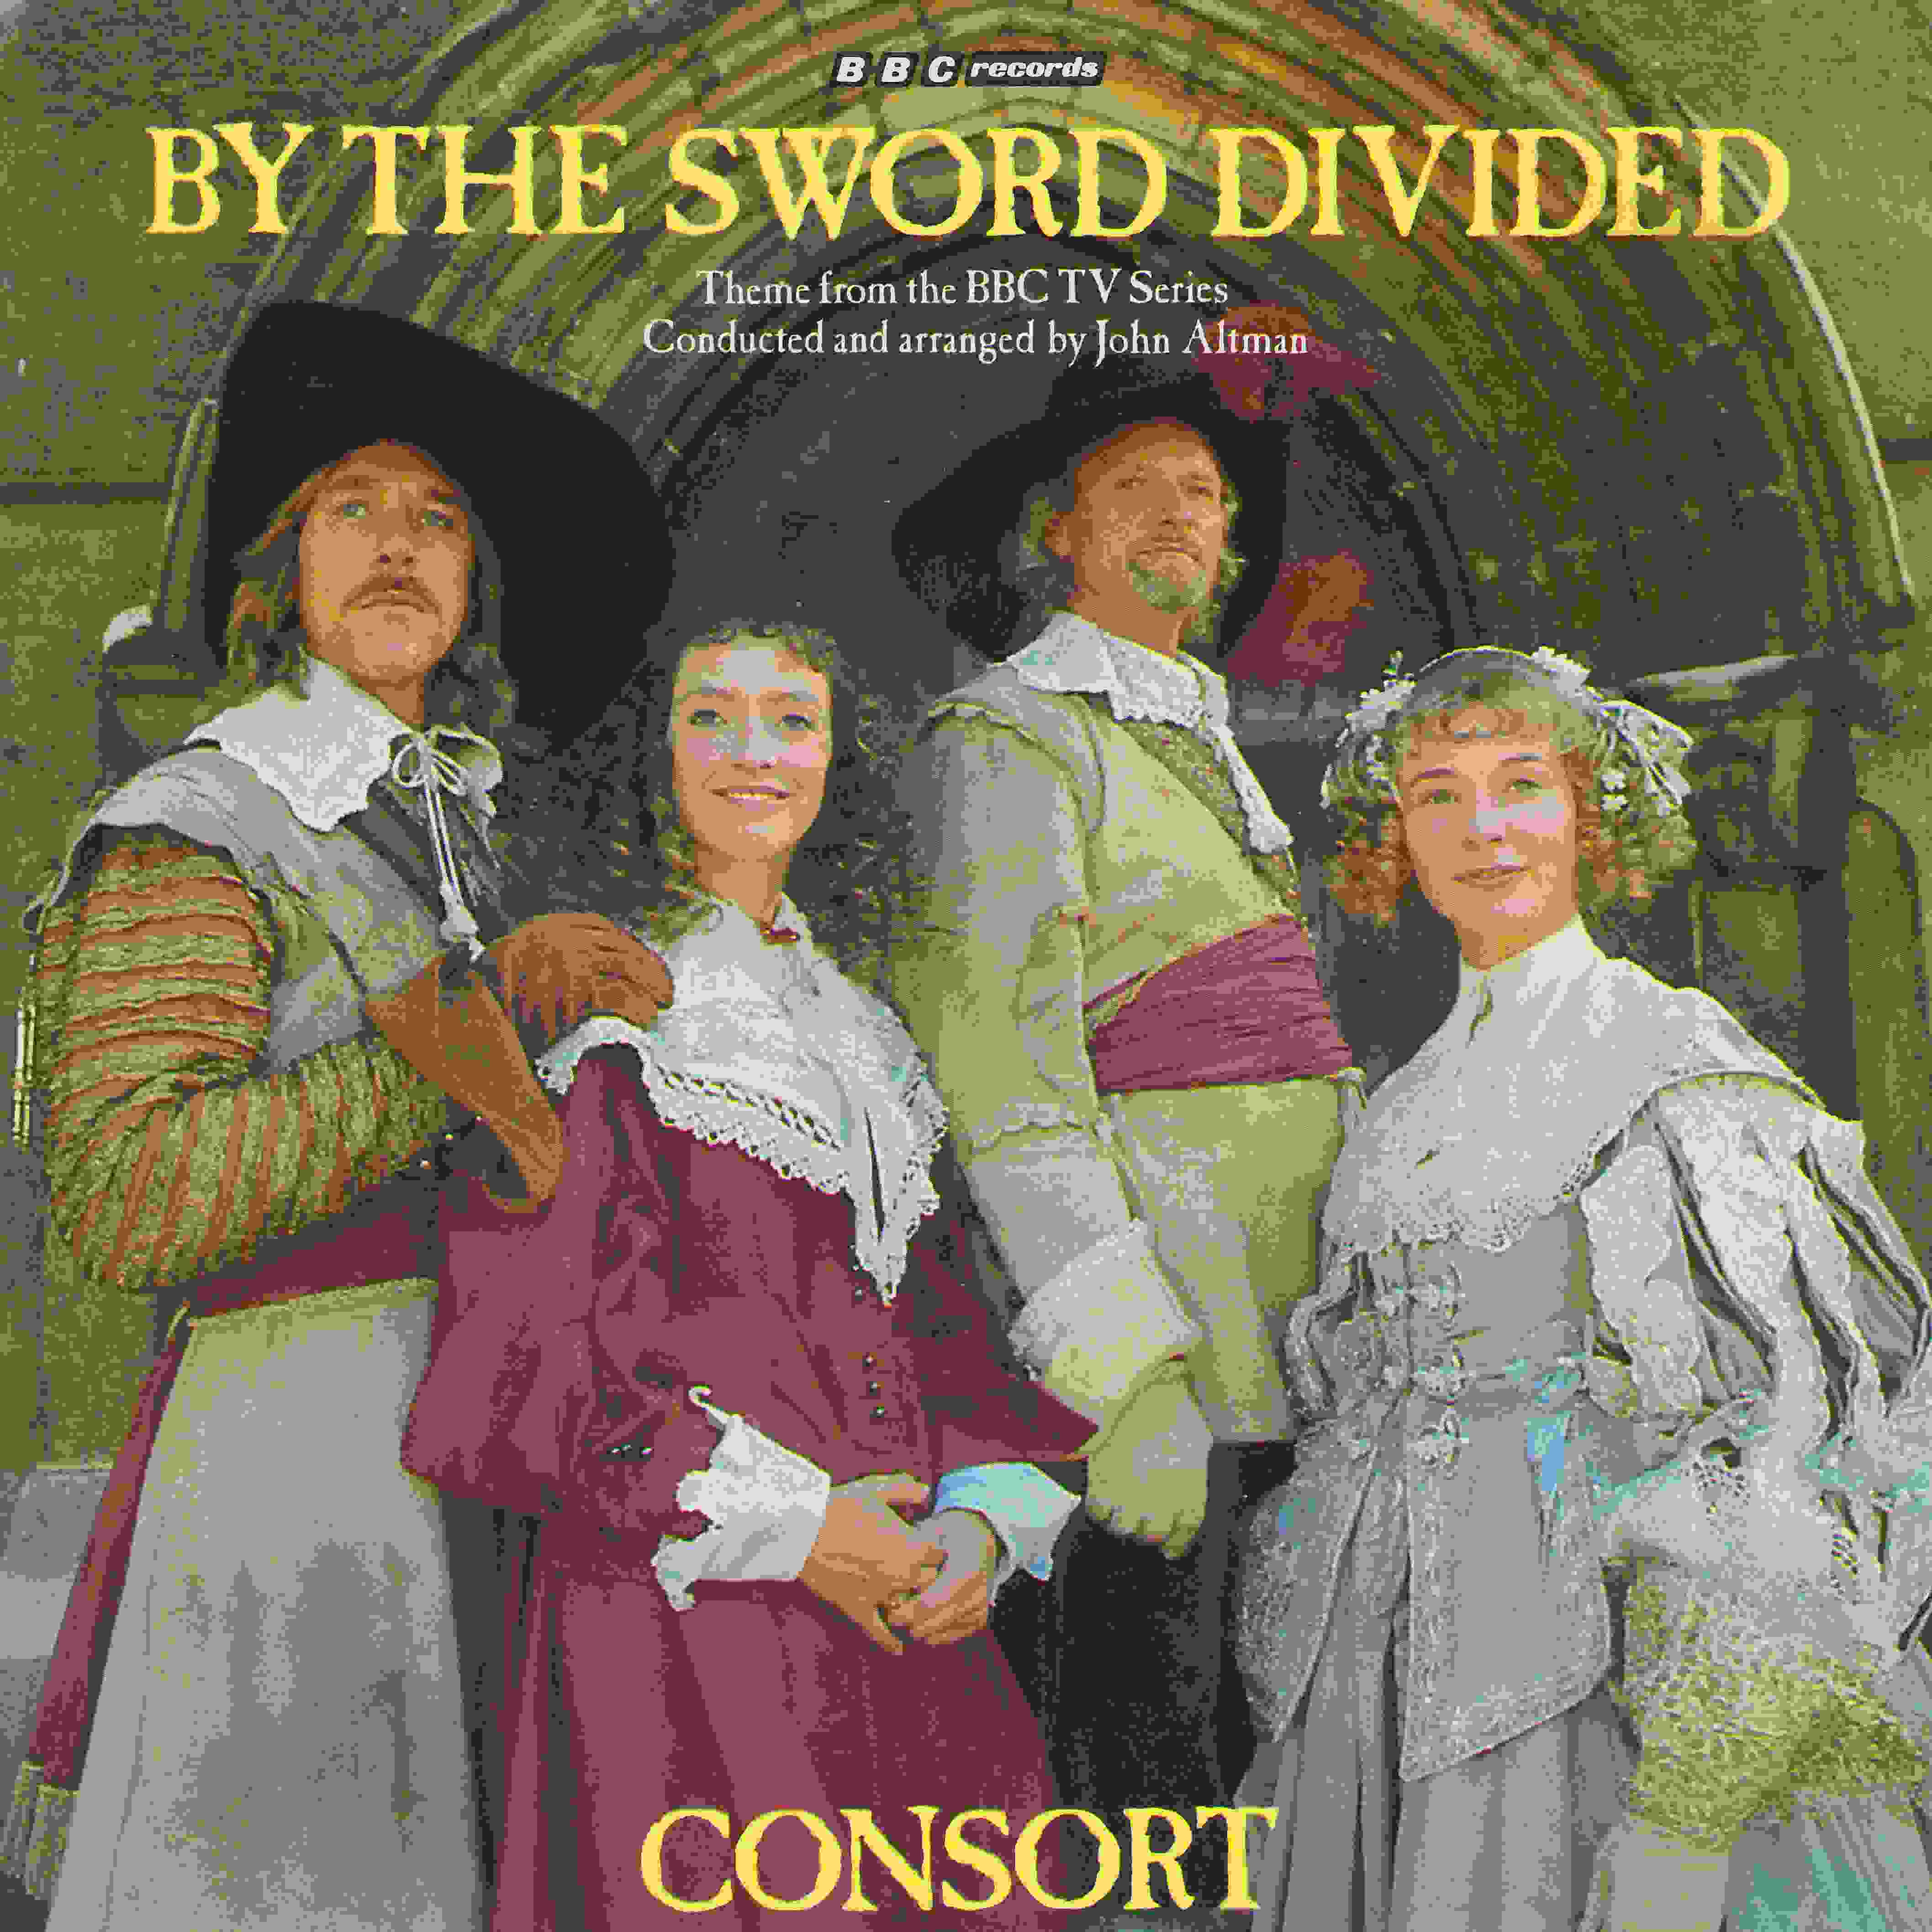 Picture of RESL 137 By the sword divided by artist Consort from the BBC records and Tapes library